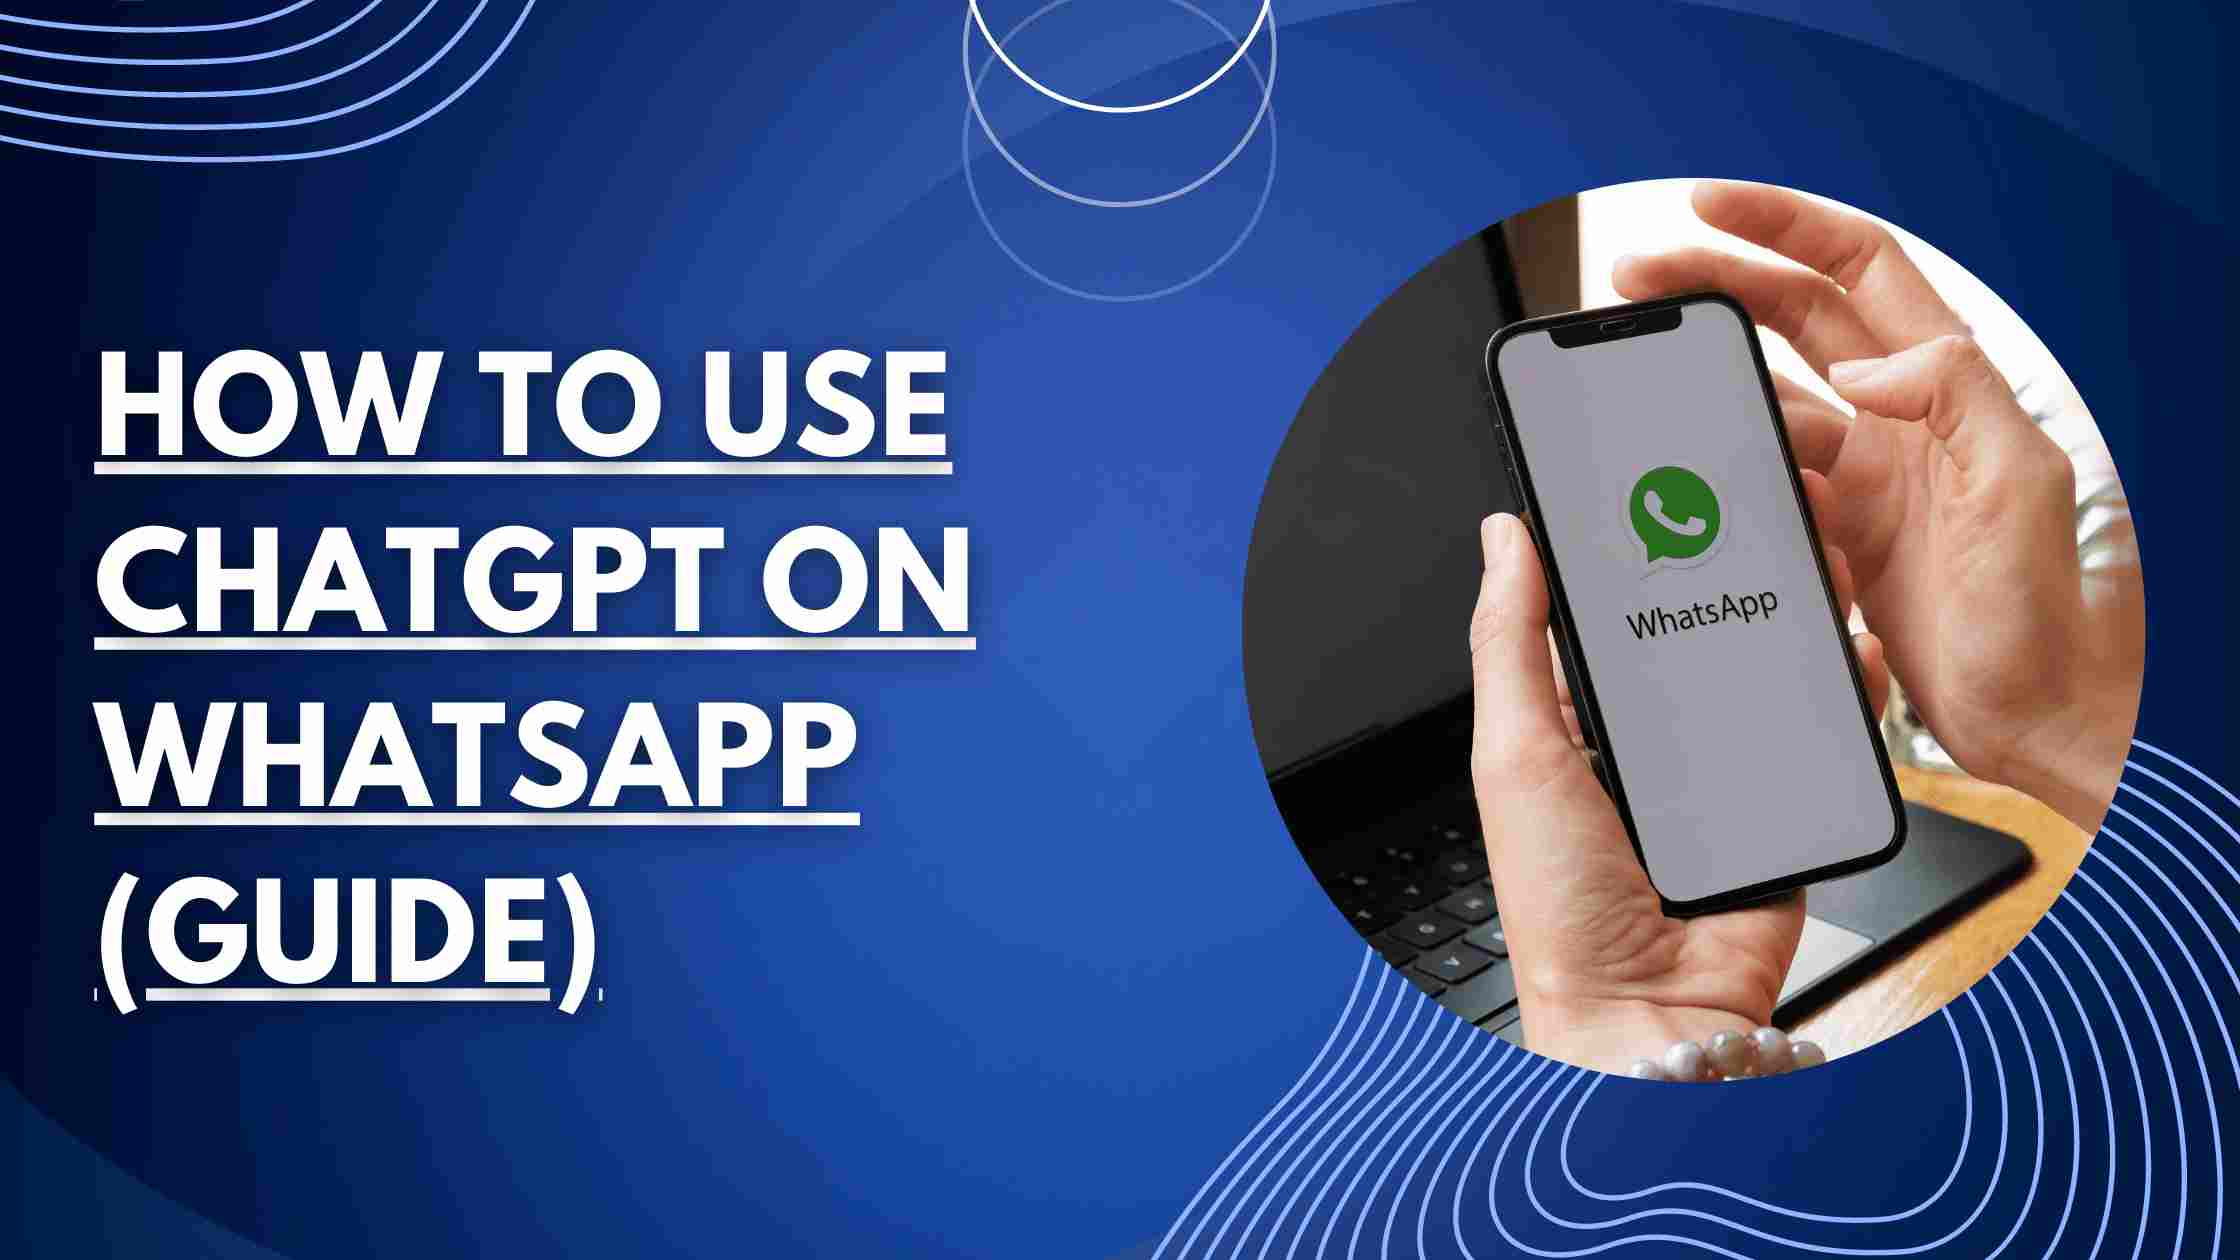 How To Use Chatgpt On Whatsapp (Guide)